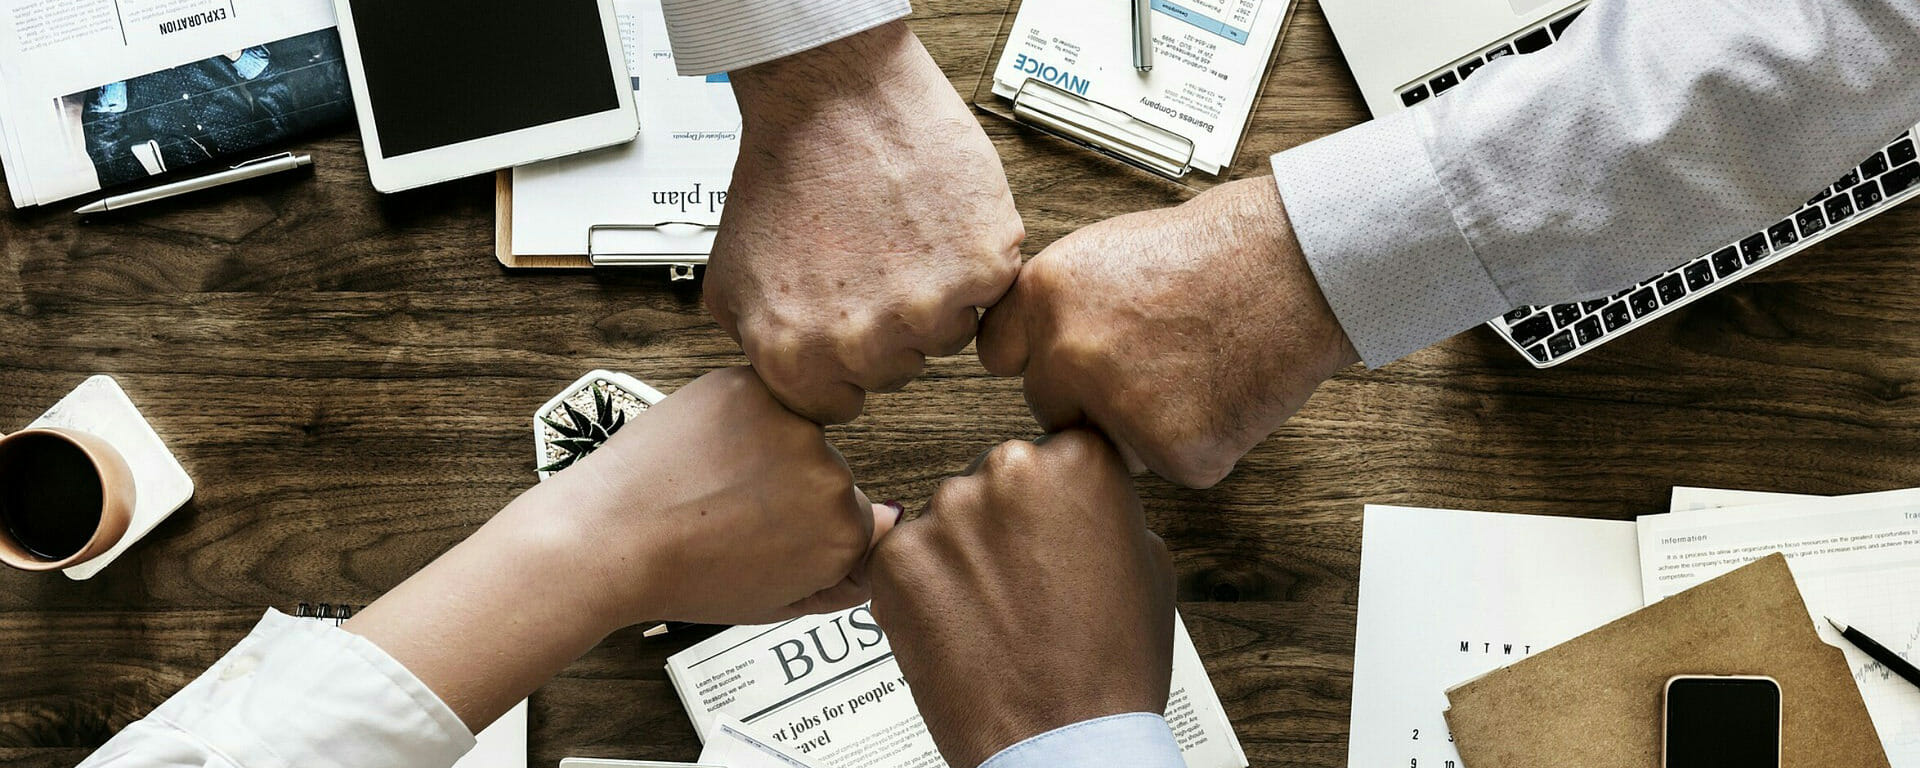 4 people fist-bumping across a table strewn with meeting materials.